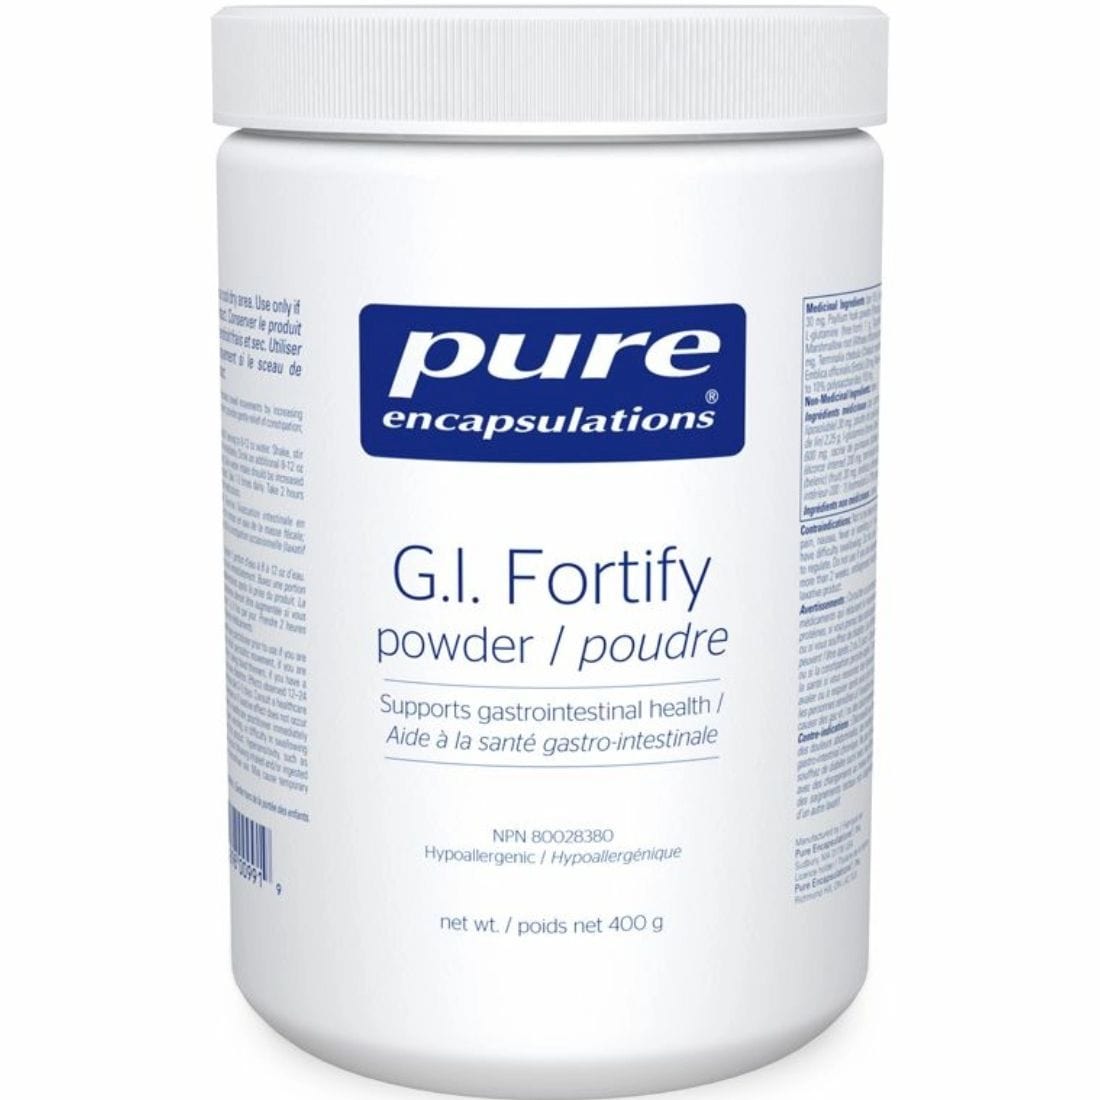 Pure Encapsulations G.I. Fortify